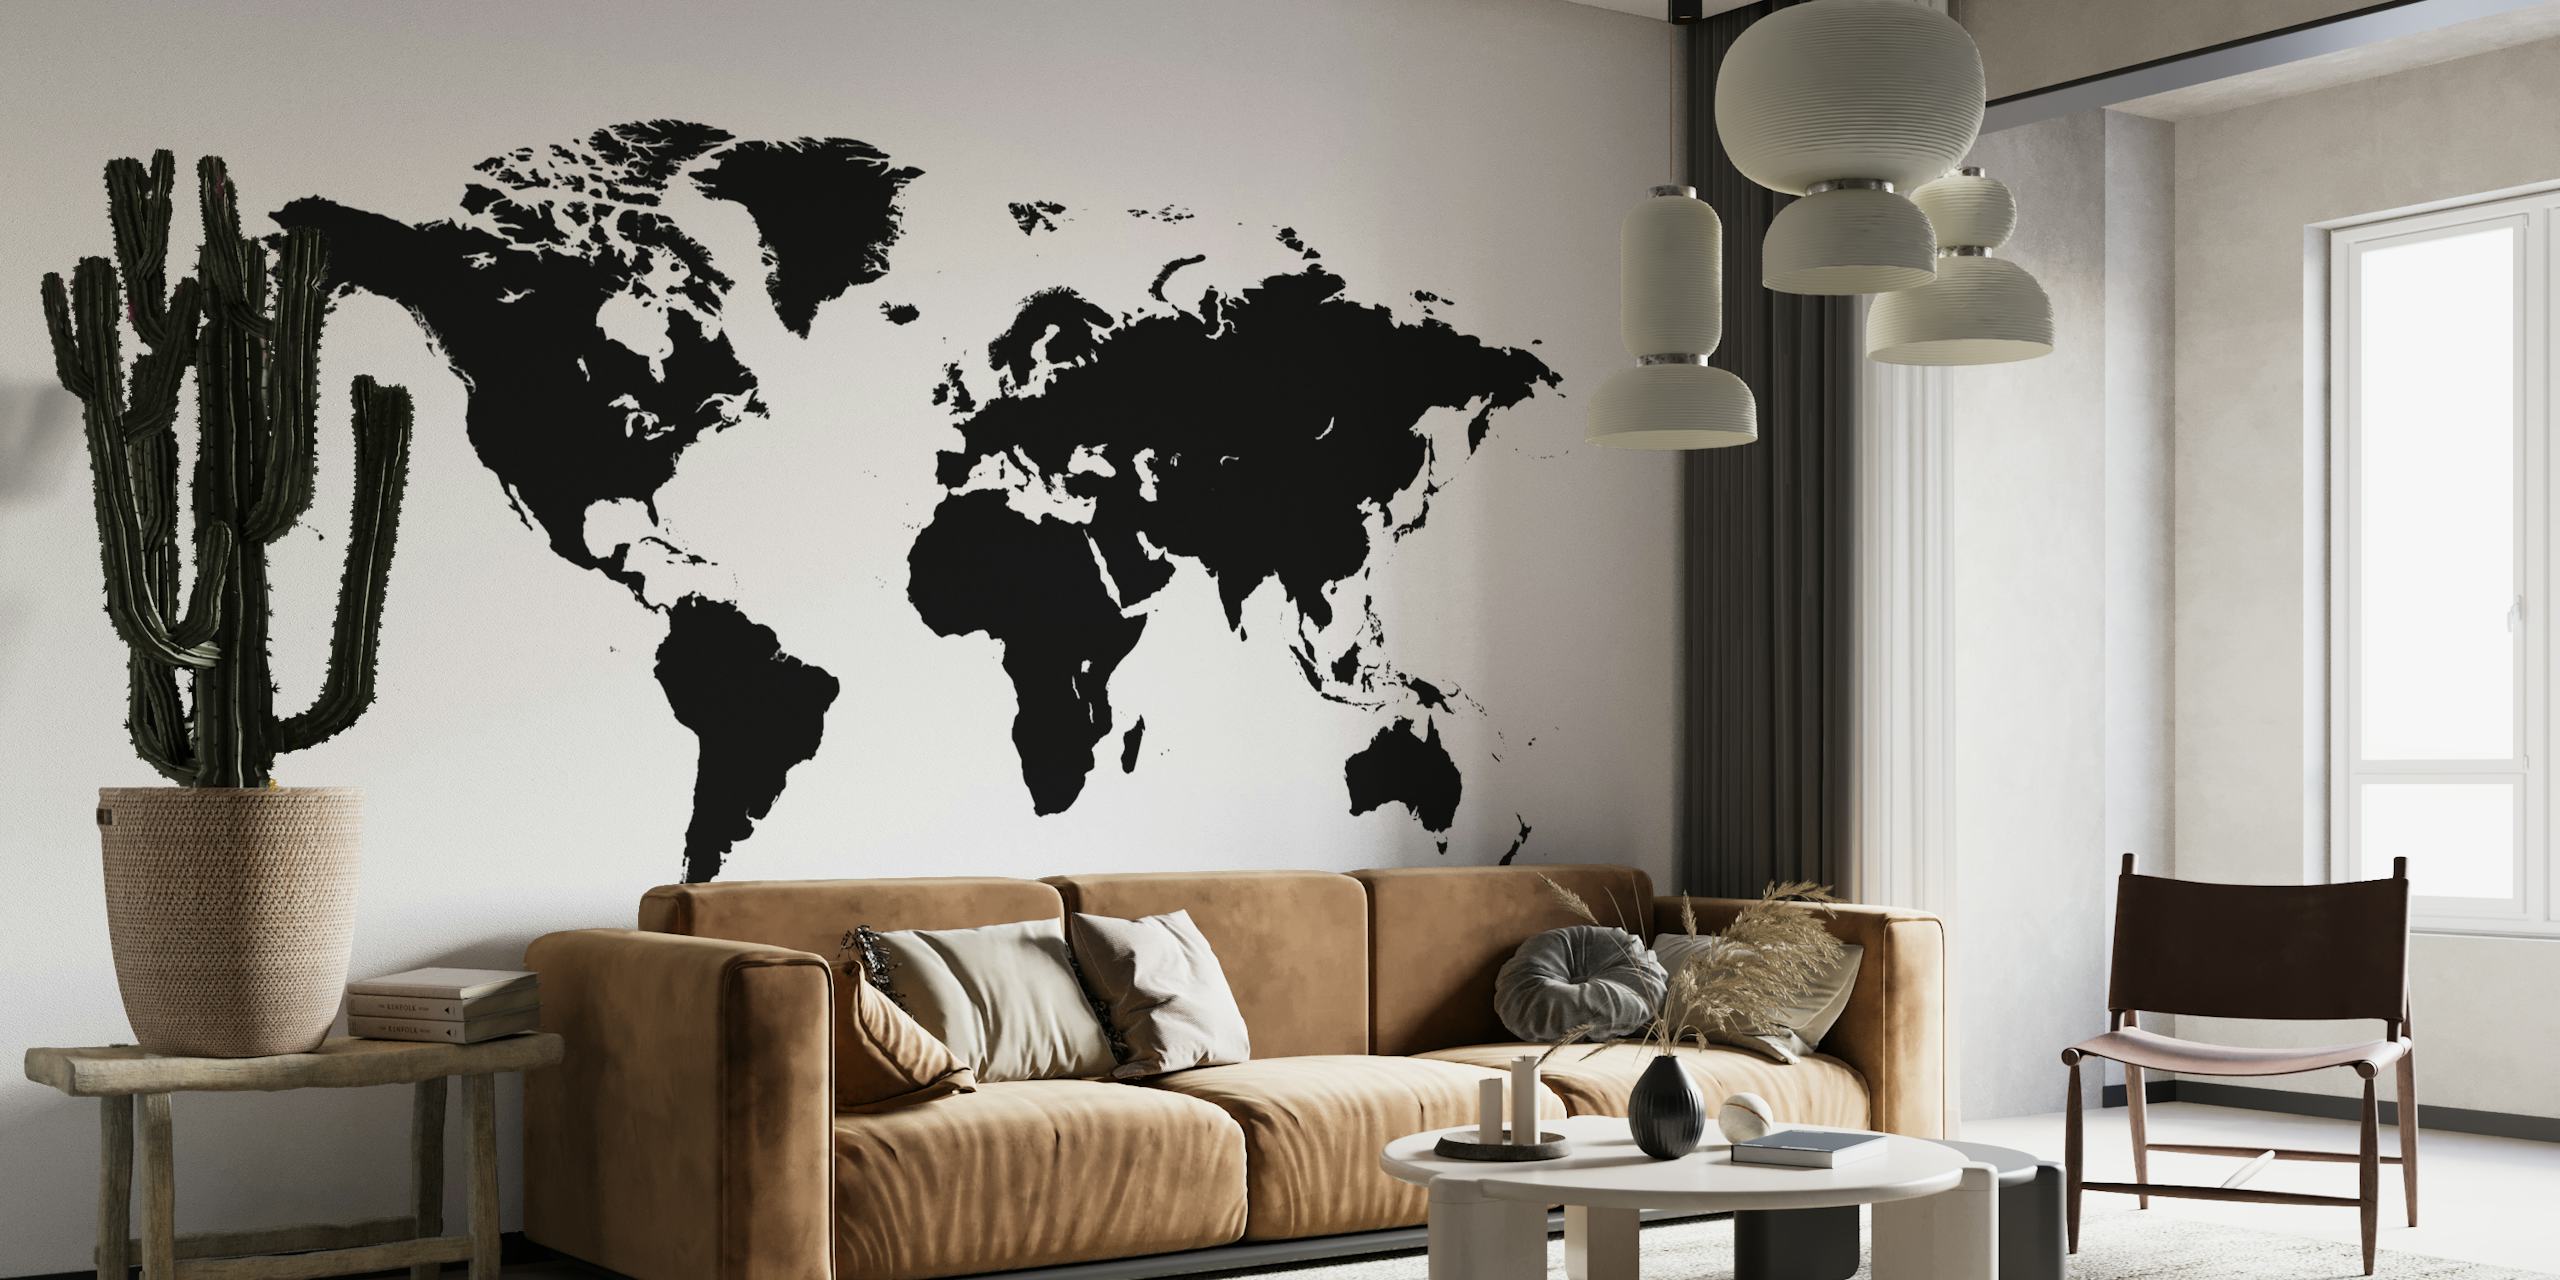 Black and white world map wall mural